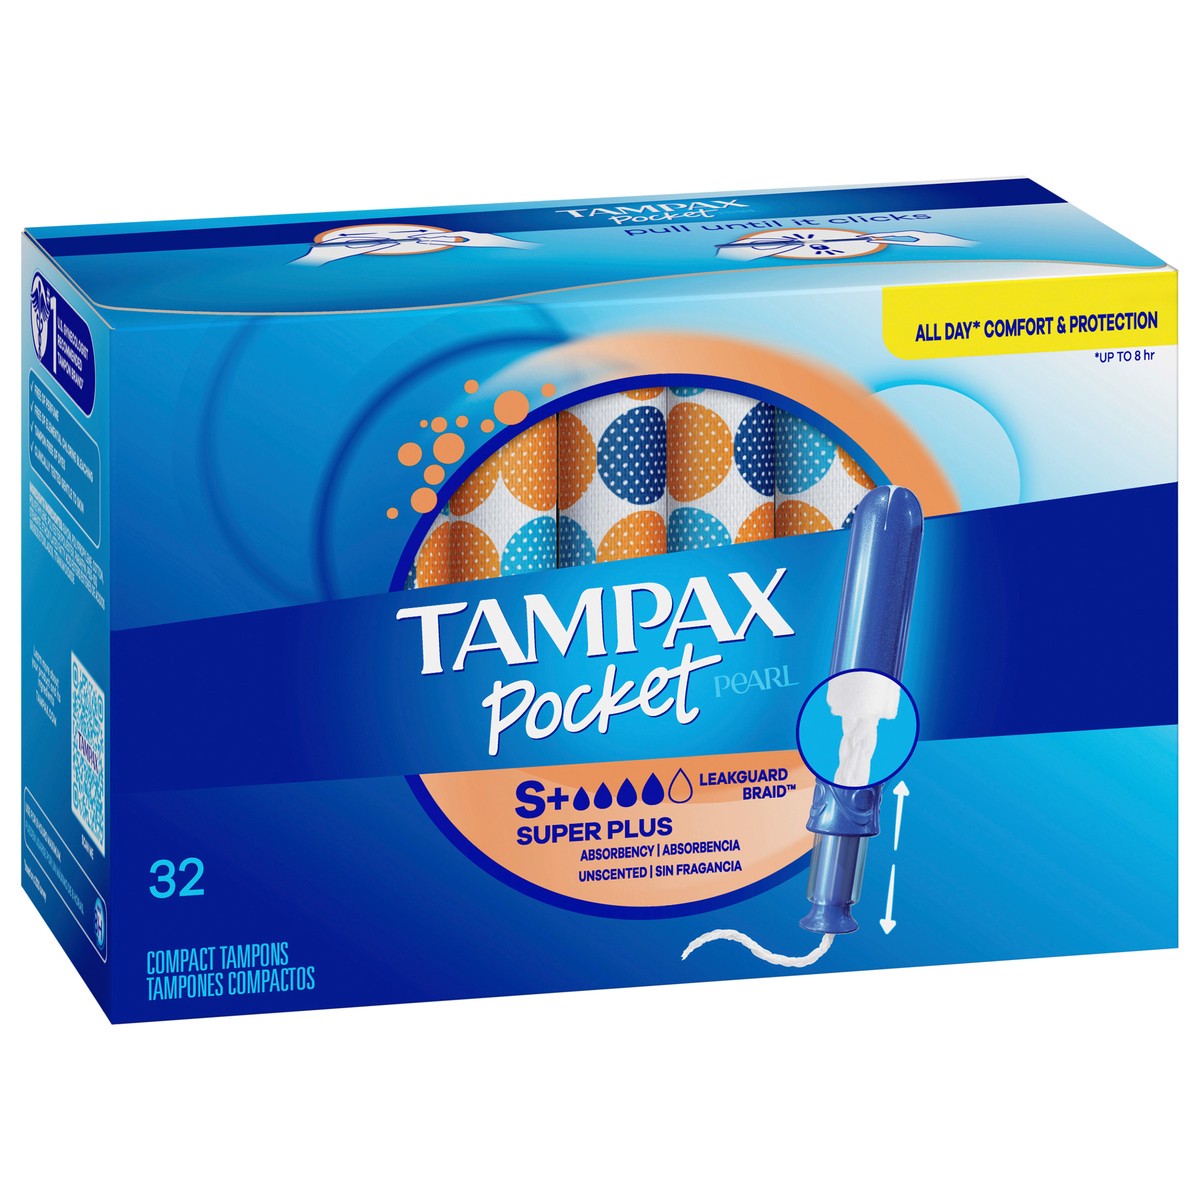 slide 2 of 9, Tampax Pocket Pearl Compact Tampons Super Plus Absorbency with BPA-Free Plastic Applicator and LeakGuard Braid, Unscented, 32 Count, 32 ct